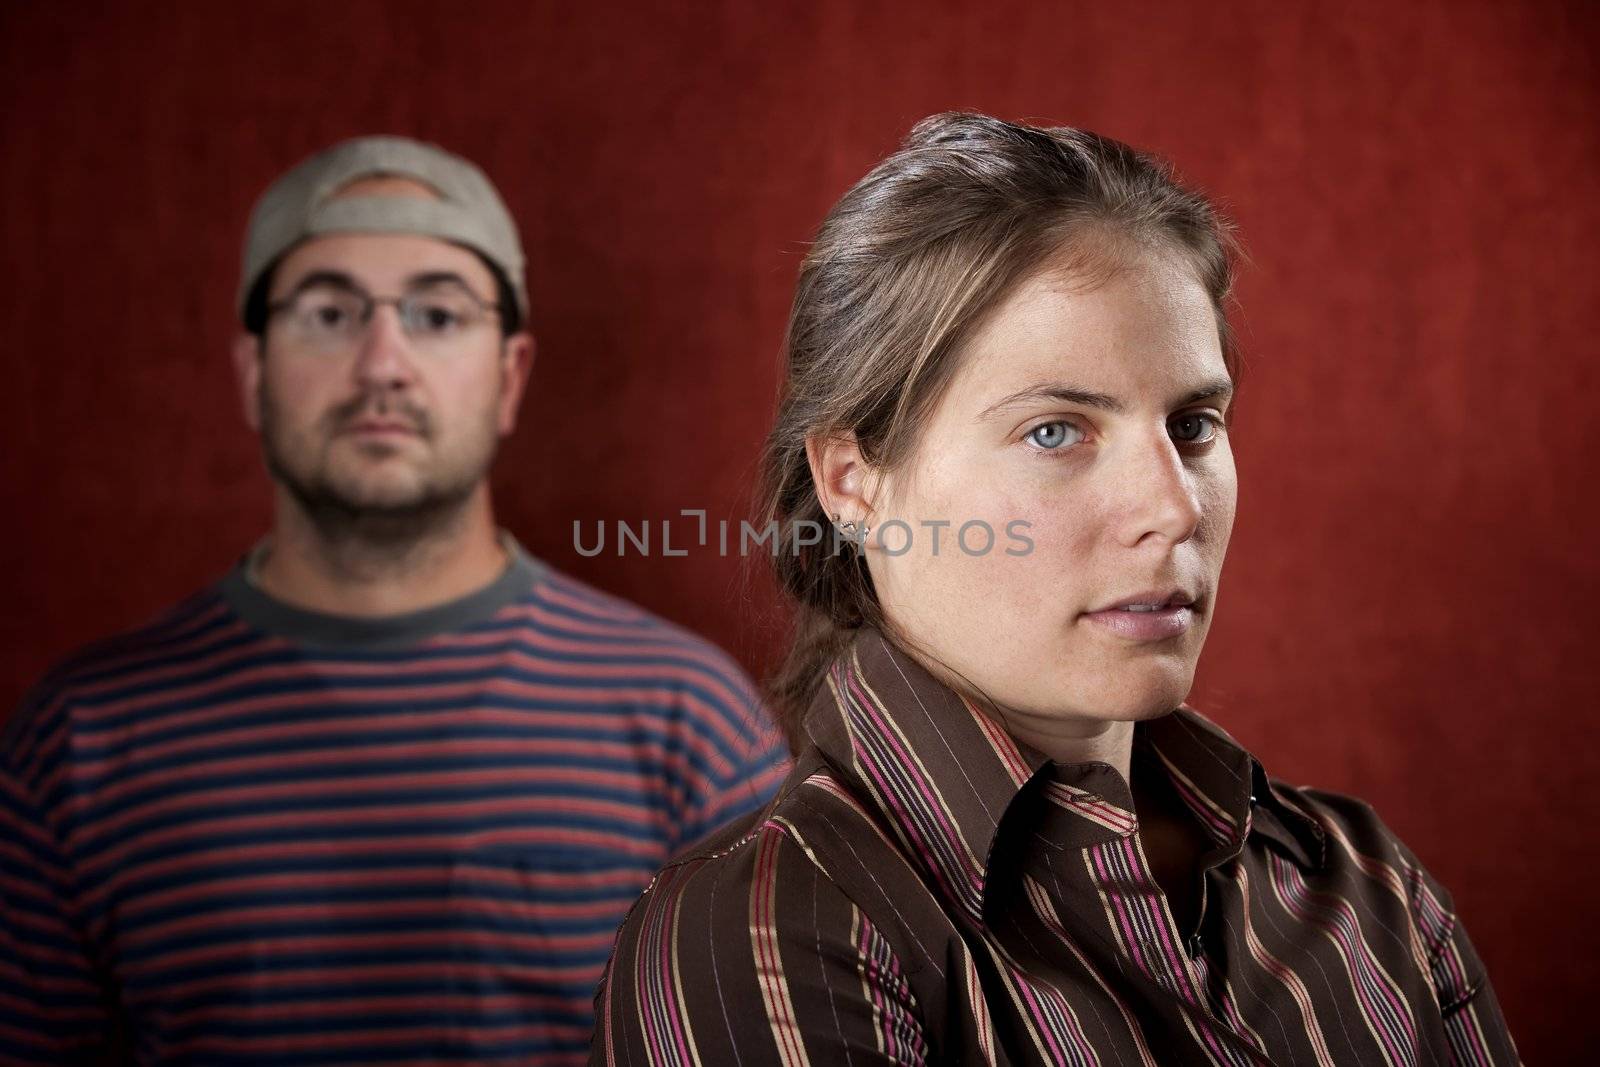 Guilty woman with upset man in the background